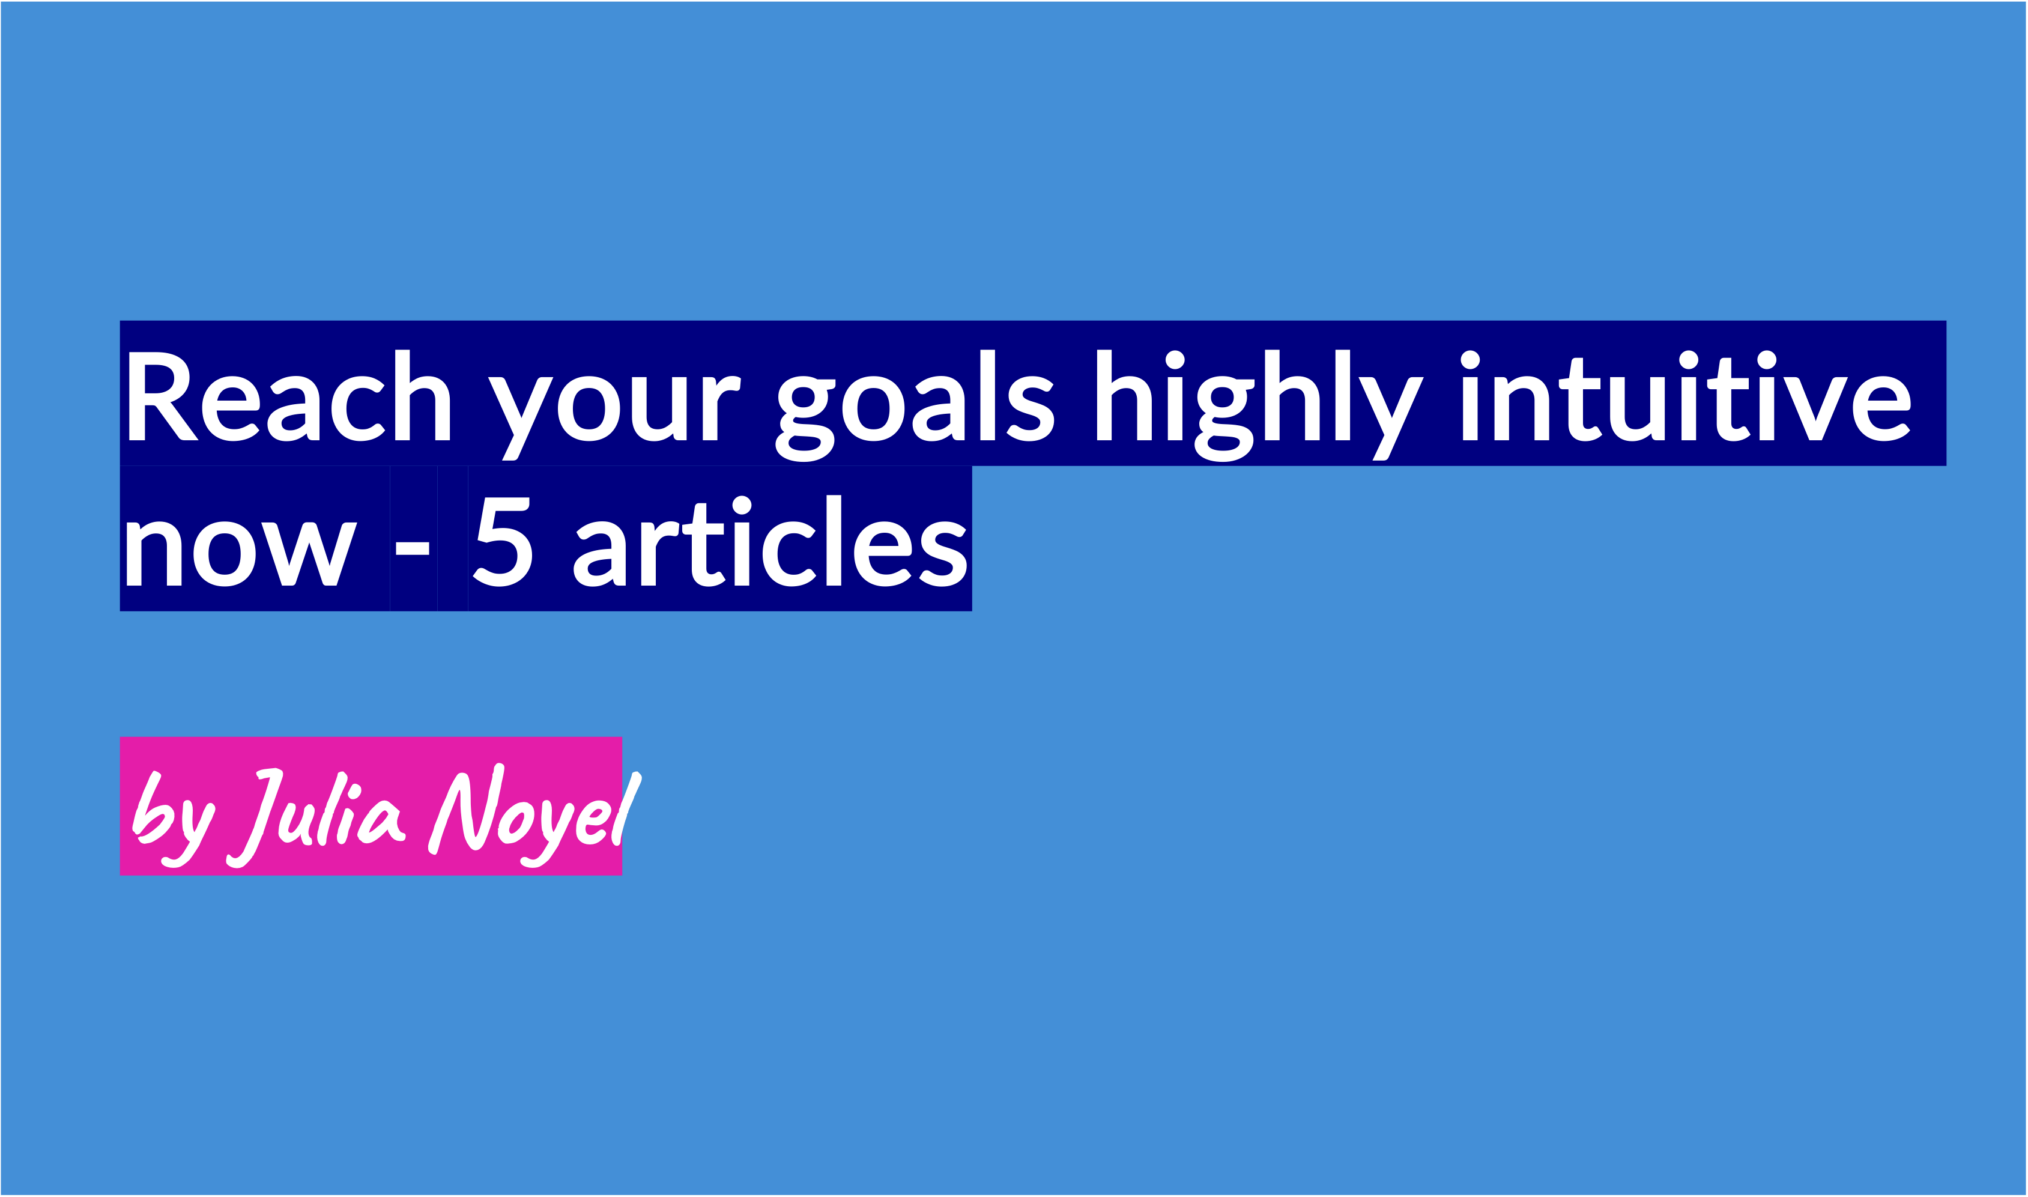 Reach your goals highly intuitive now - 5 articles by Julia Noyel